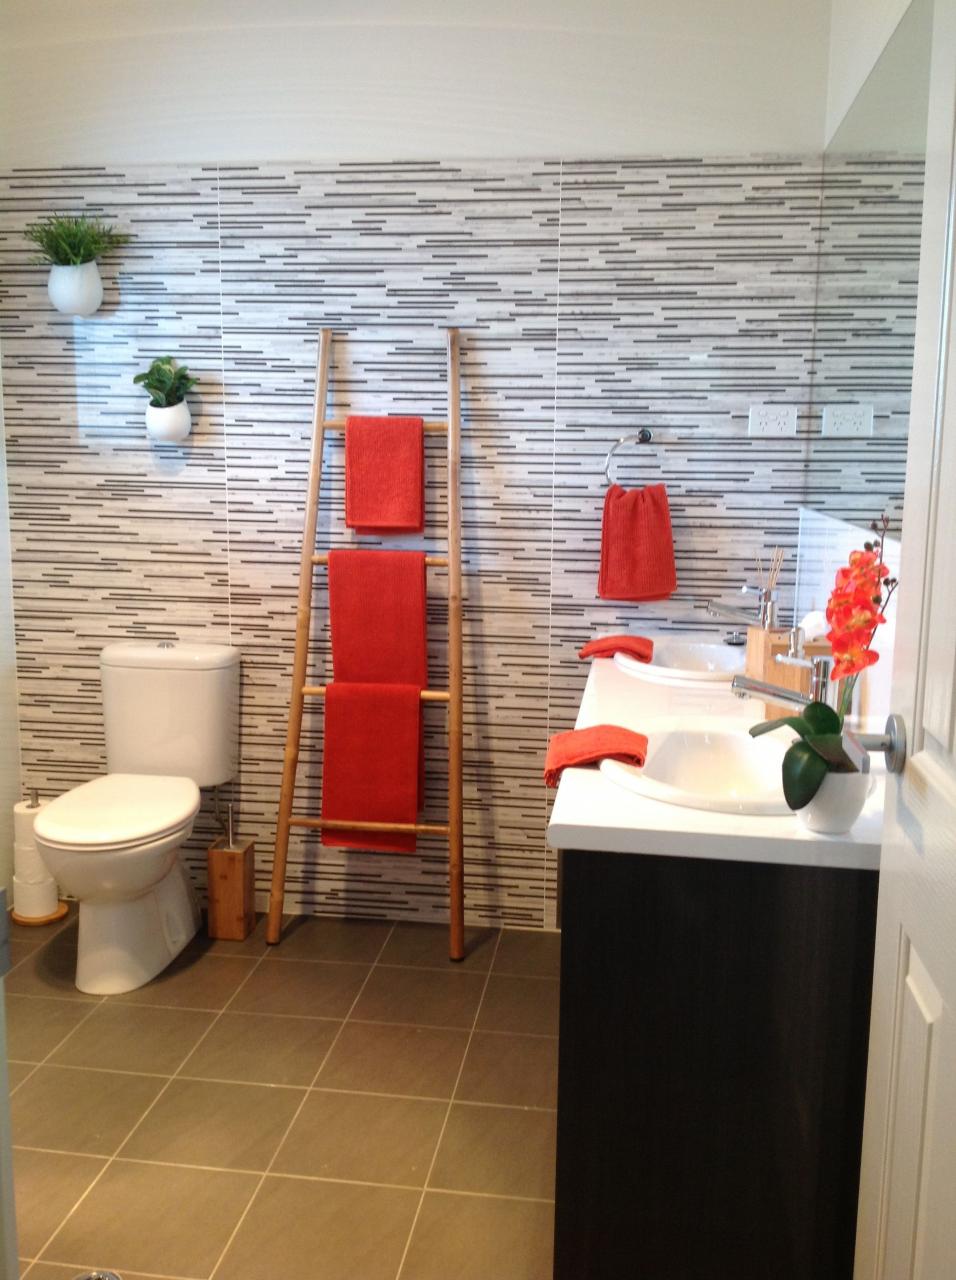 Friends ensuite bathroom I styled to match their bedroom. Ensuite